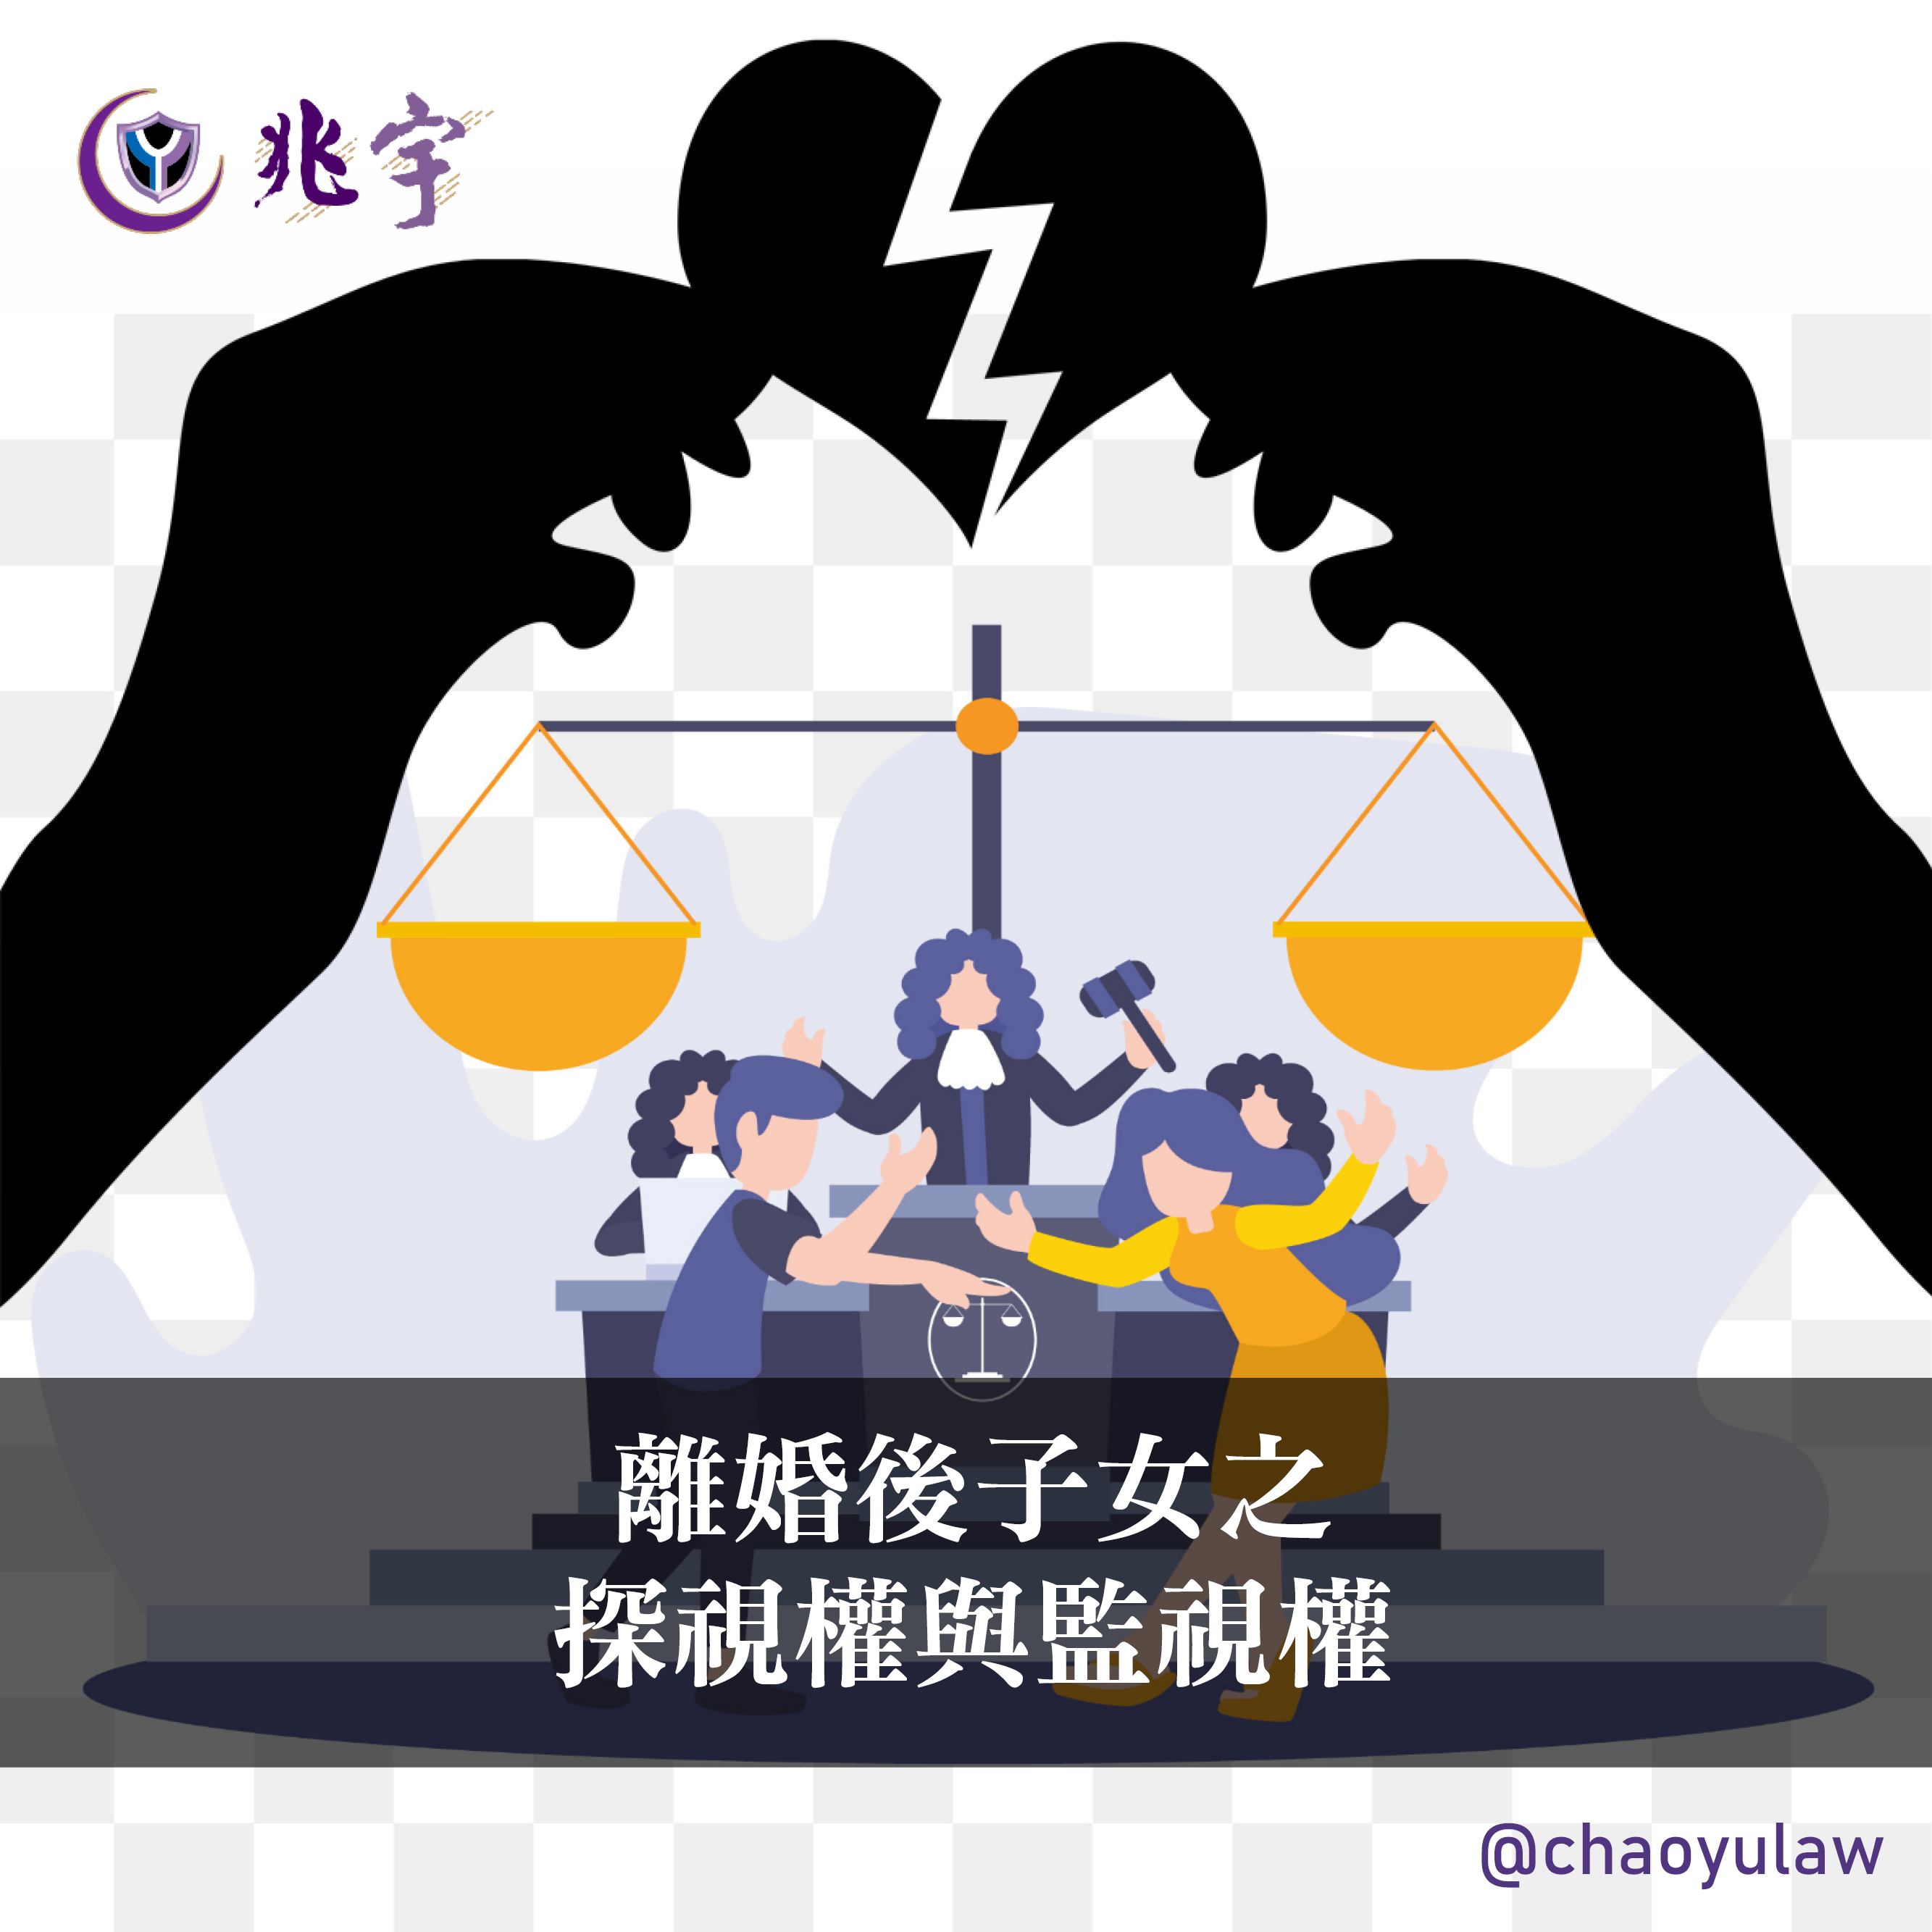 You are currently viewing 夫妻離婚爭搶子女監護權　法官通常這樣判